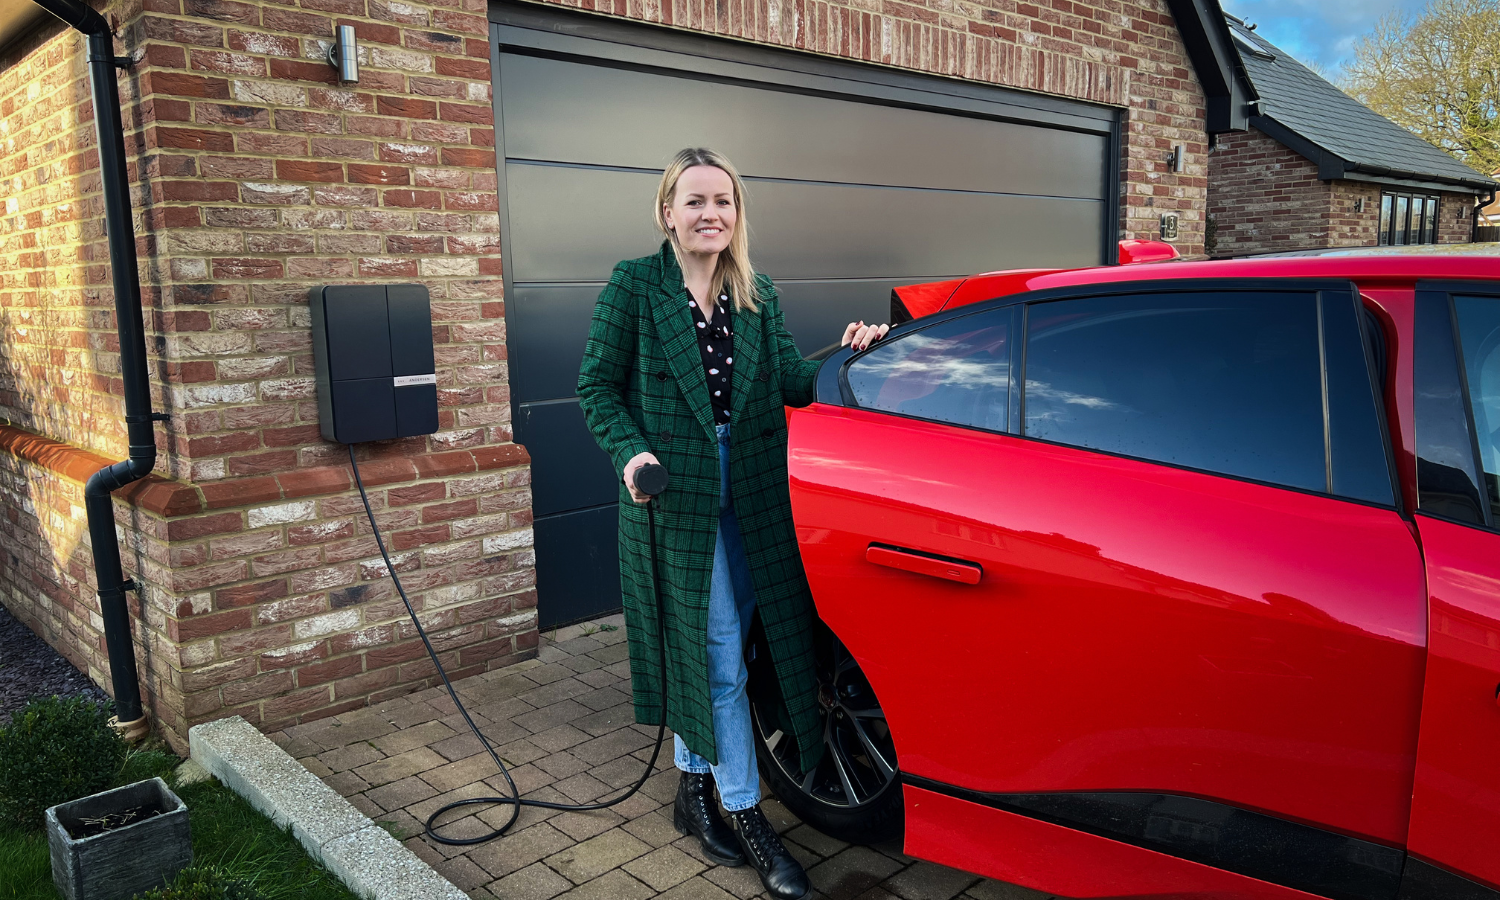 Family saved £850 on electricity bills last year with simple EV charging tip